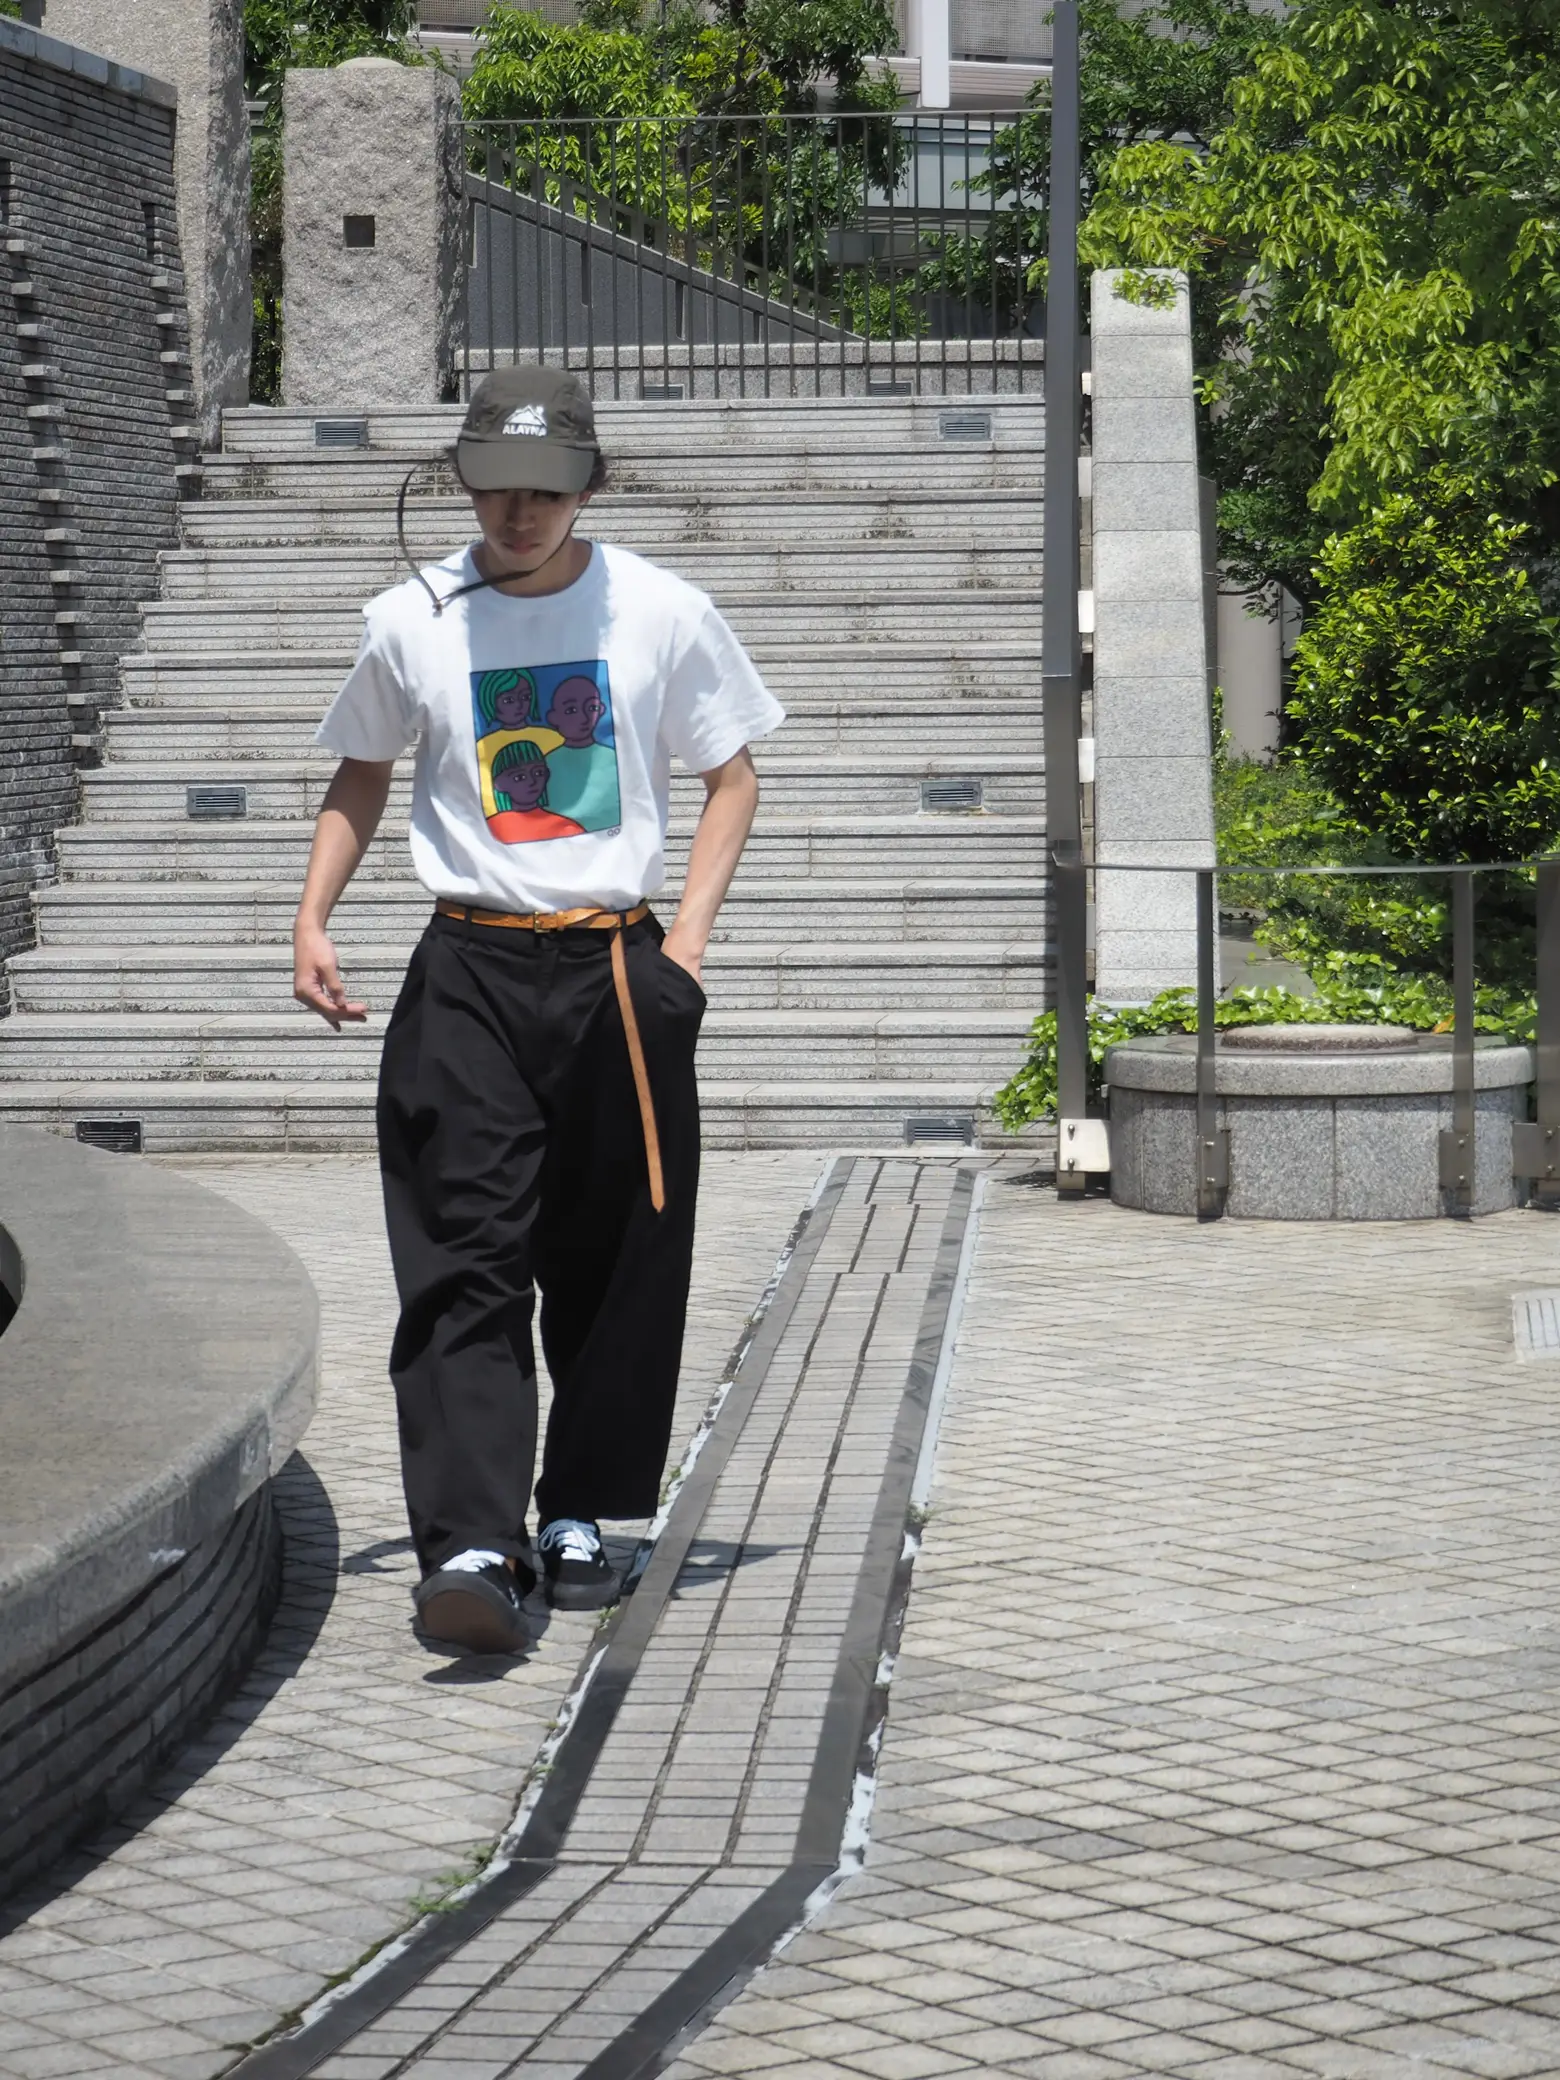 A MASSO × KID FRESINO T-SHIRT | Gallery posted by とや | Lemon8